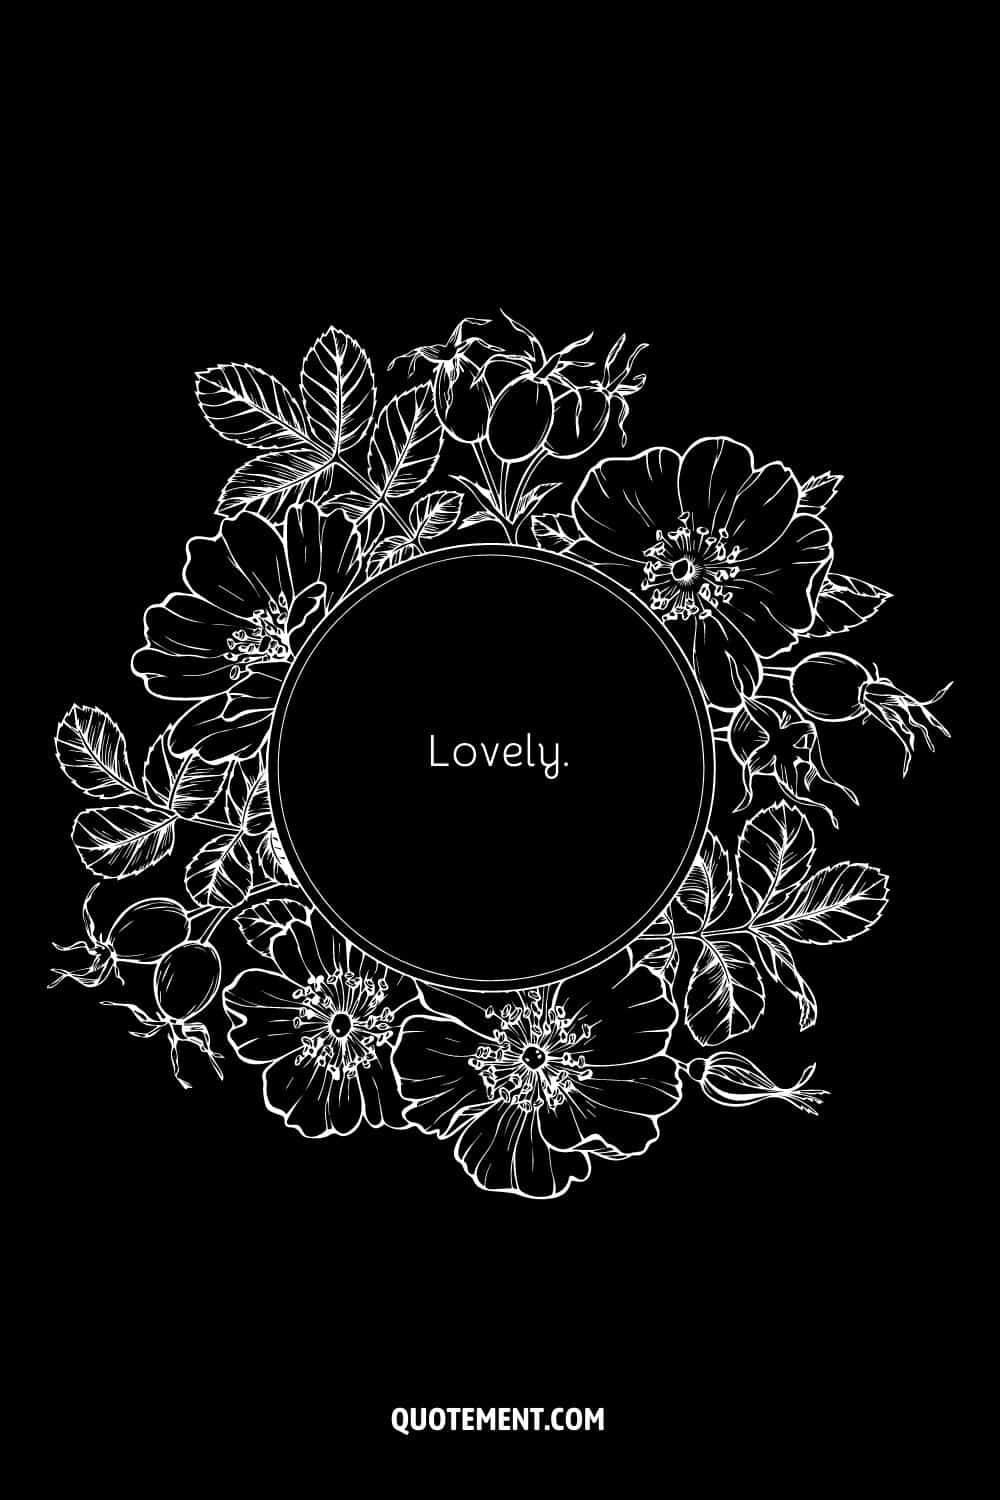 Cute one-word caption perfect for Insta in a circle decorated with flowers